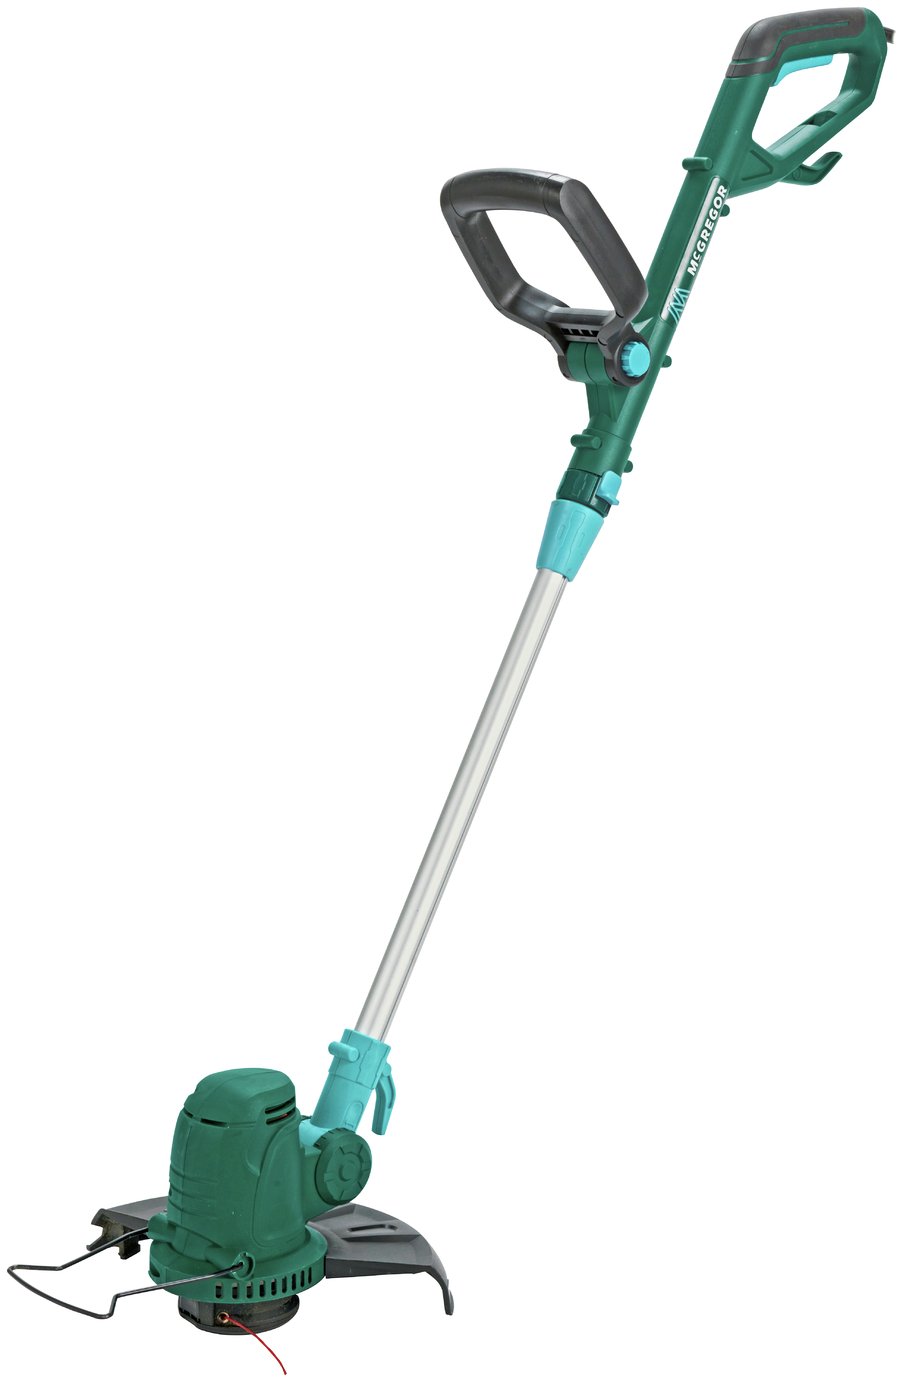 qualcast corded grass trimmer 600w